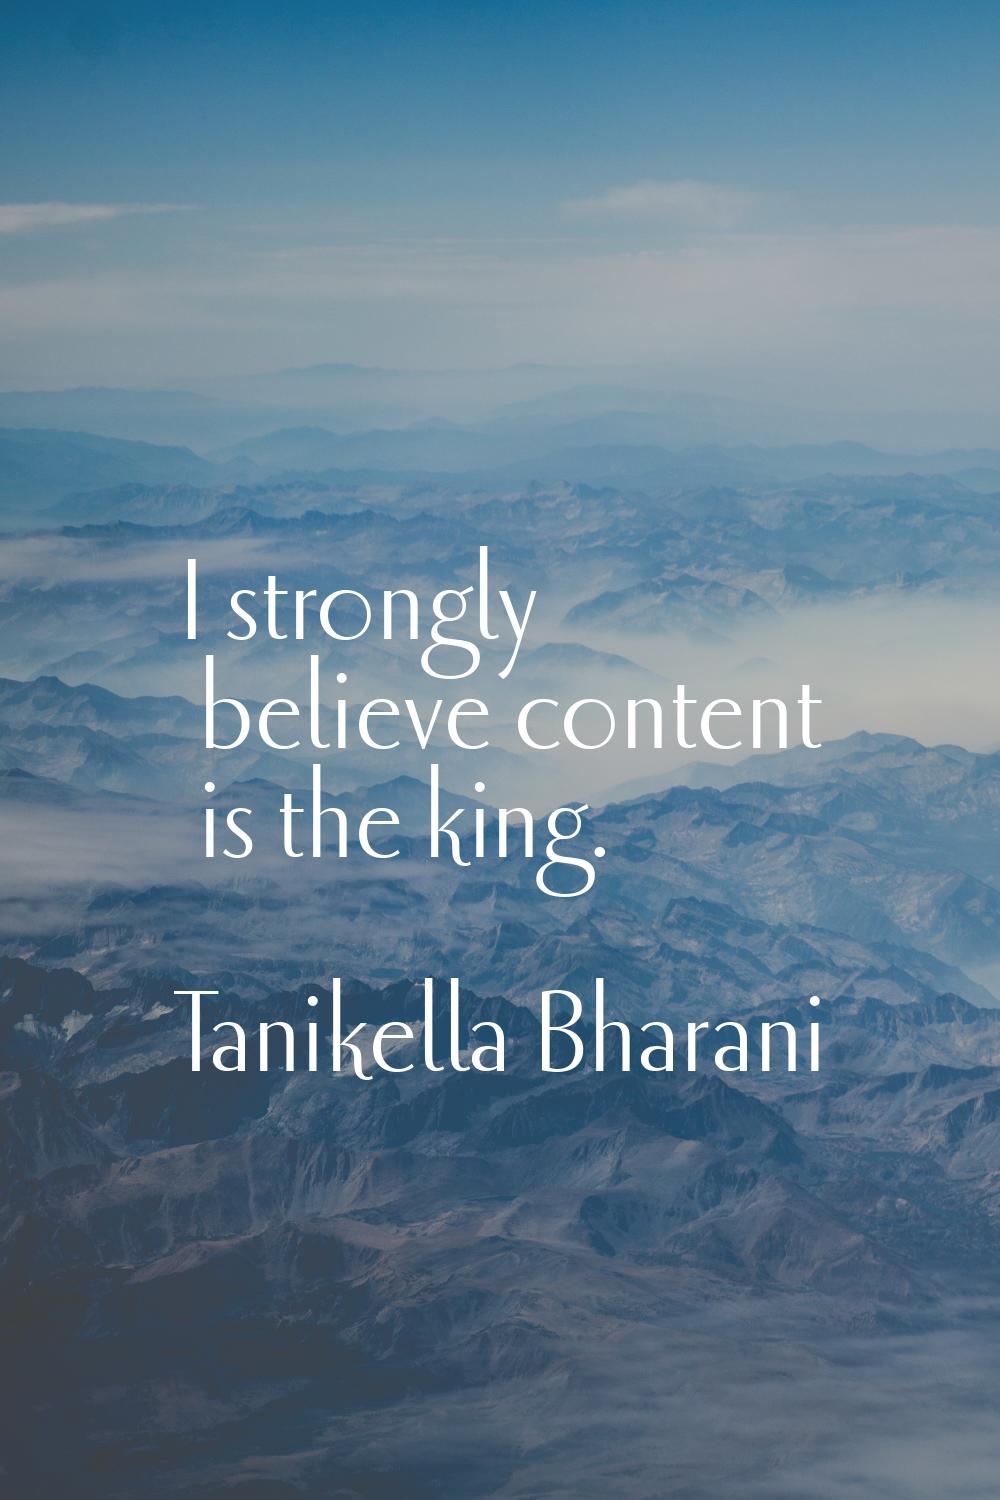 I strongly believe content is the king.